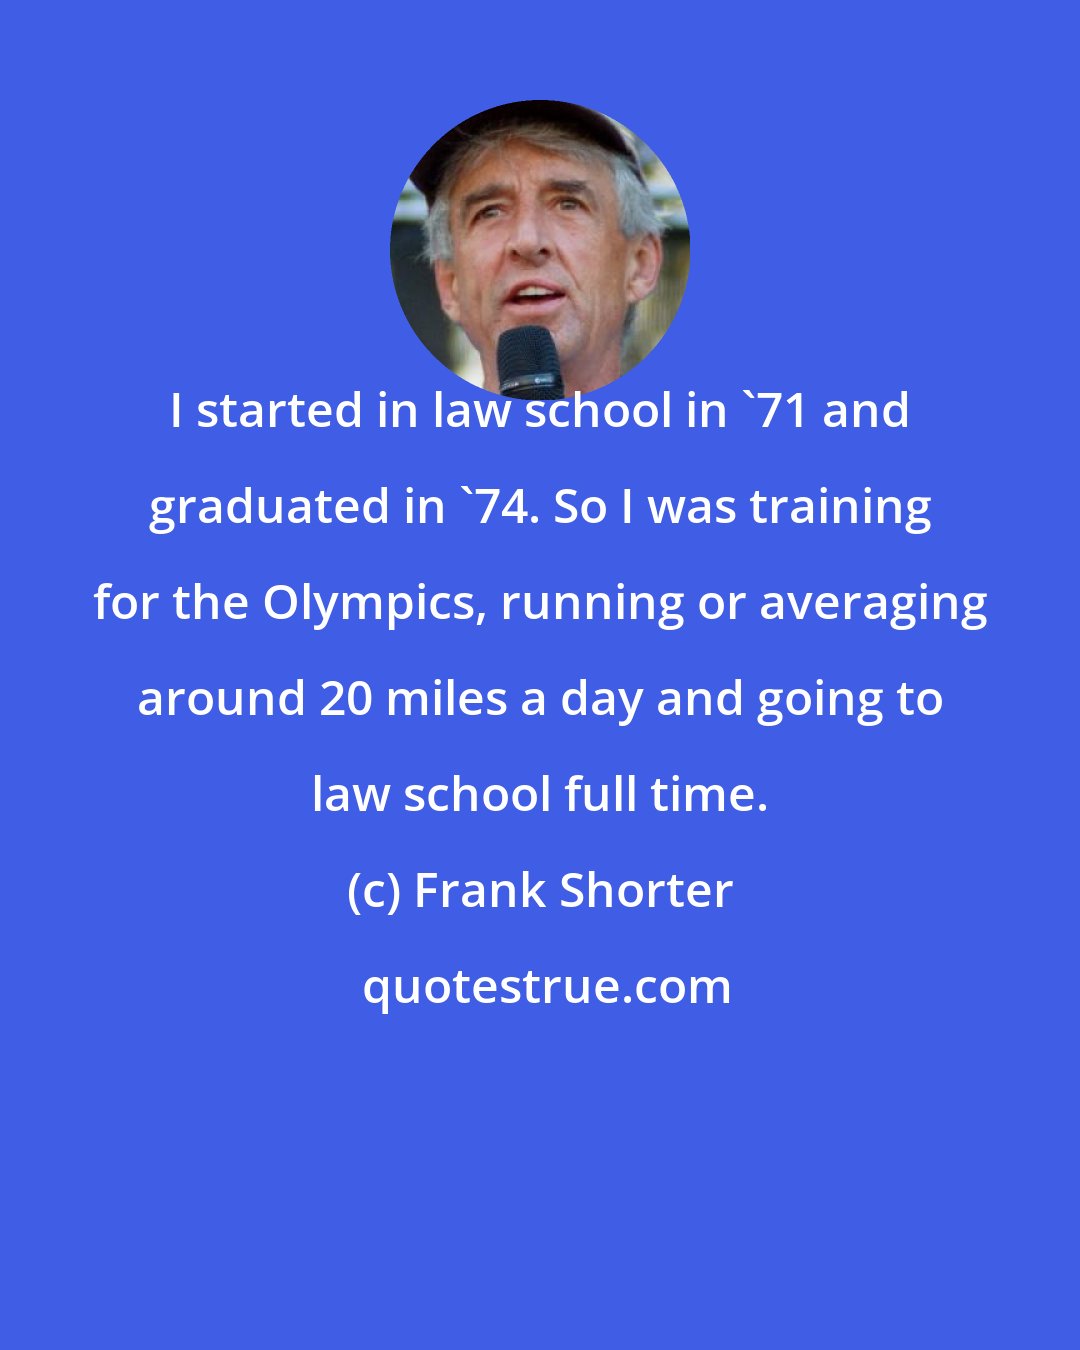 Frank Shorter: I started in law school in '71 and graduated in '74. So I was training for the Olympics, running or averaging around 20 miles a day and going to law school full time.